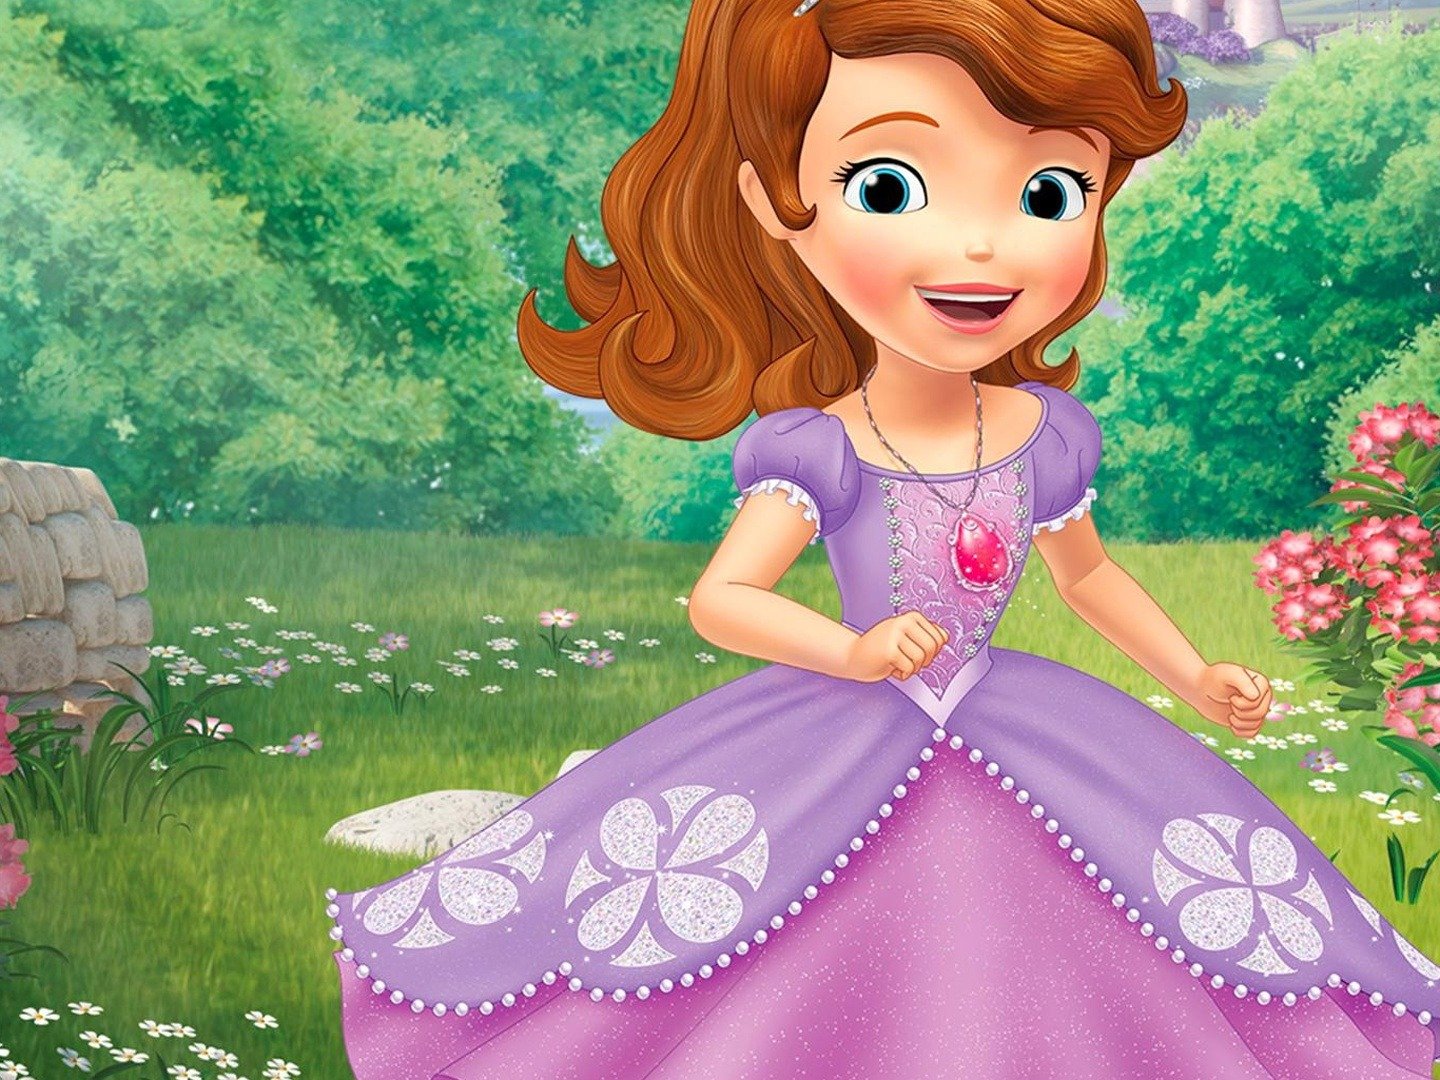 Sofia the First on TV | Season 4 Episode 2 | Channels and schedules ...